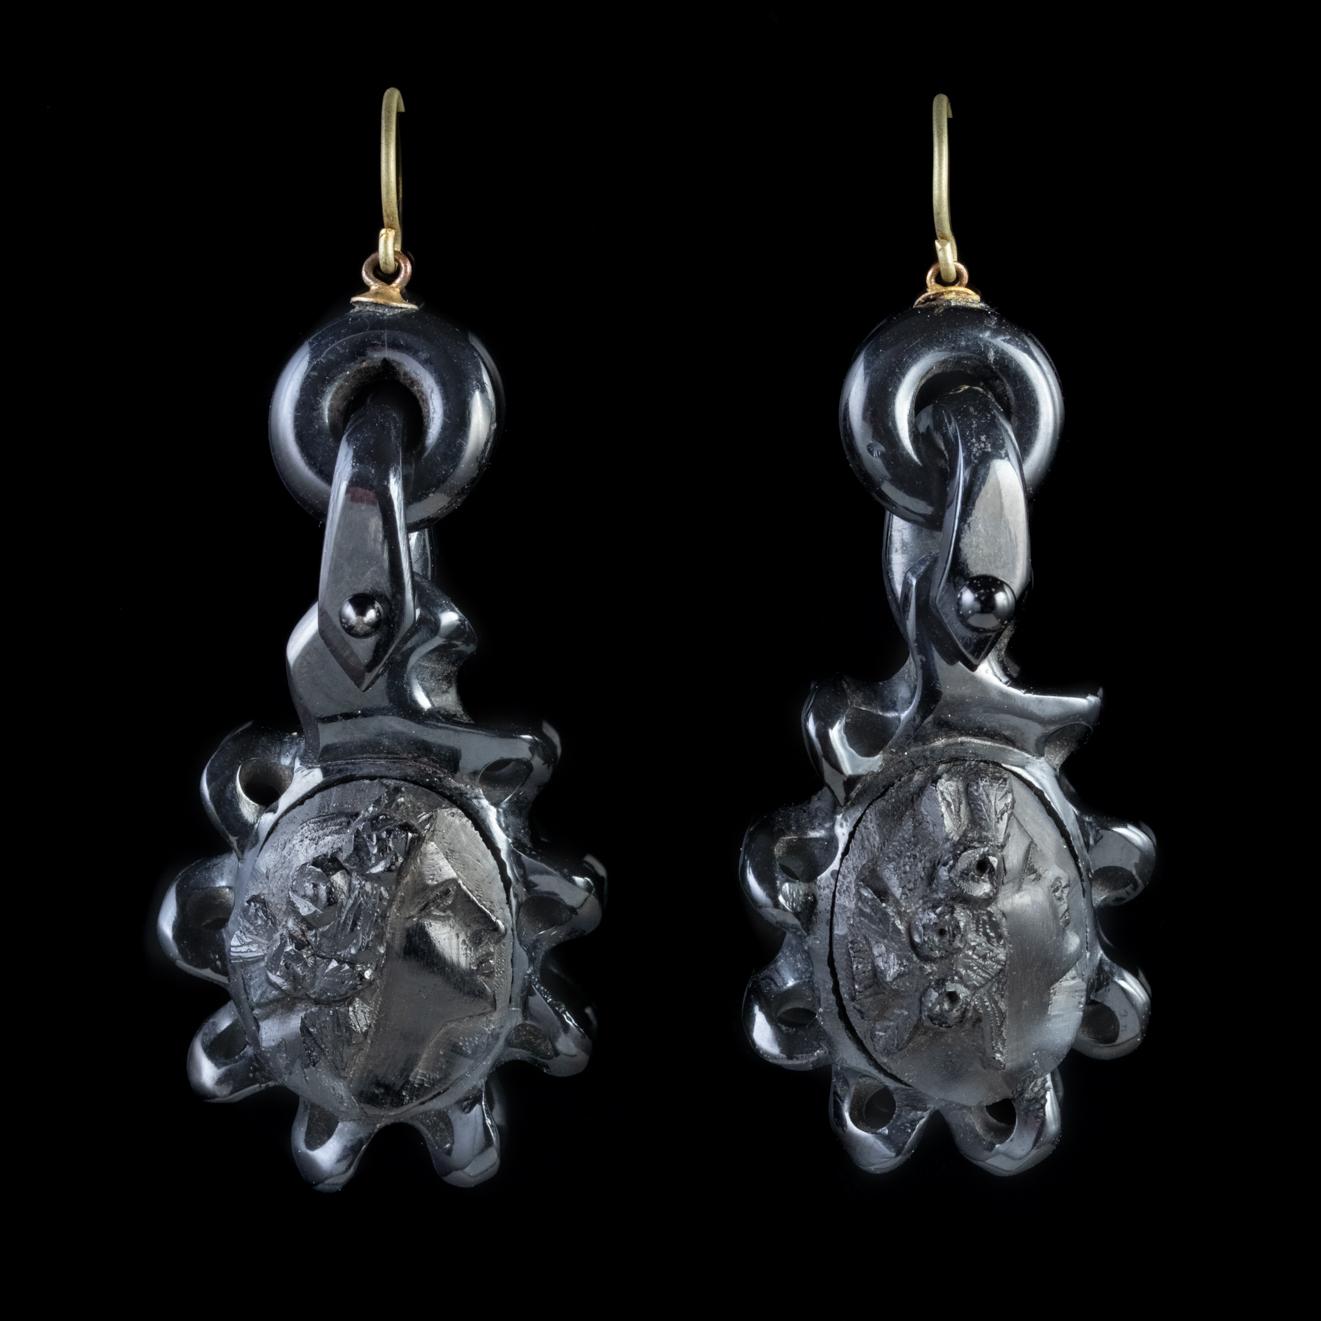 An unusual pair of Antique mid-Victorian earrings dating Circa 1860. The earrings are hand carved from Whitby Jet and feature a detailed high relief cameo depicting the side portrait of an elegant lady with flowers in her hair. 

Whitby Jet is a